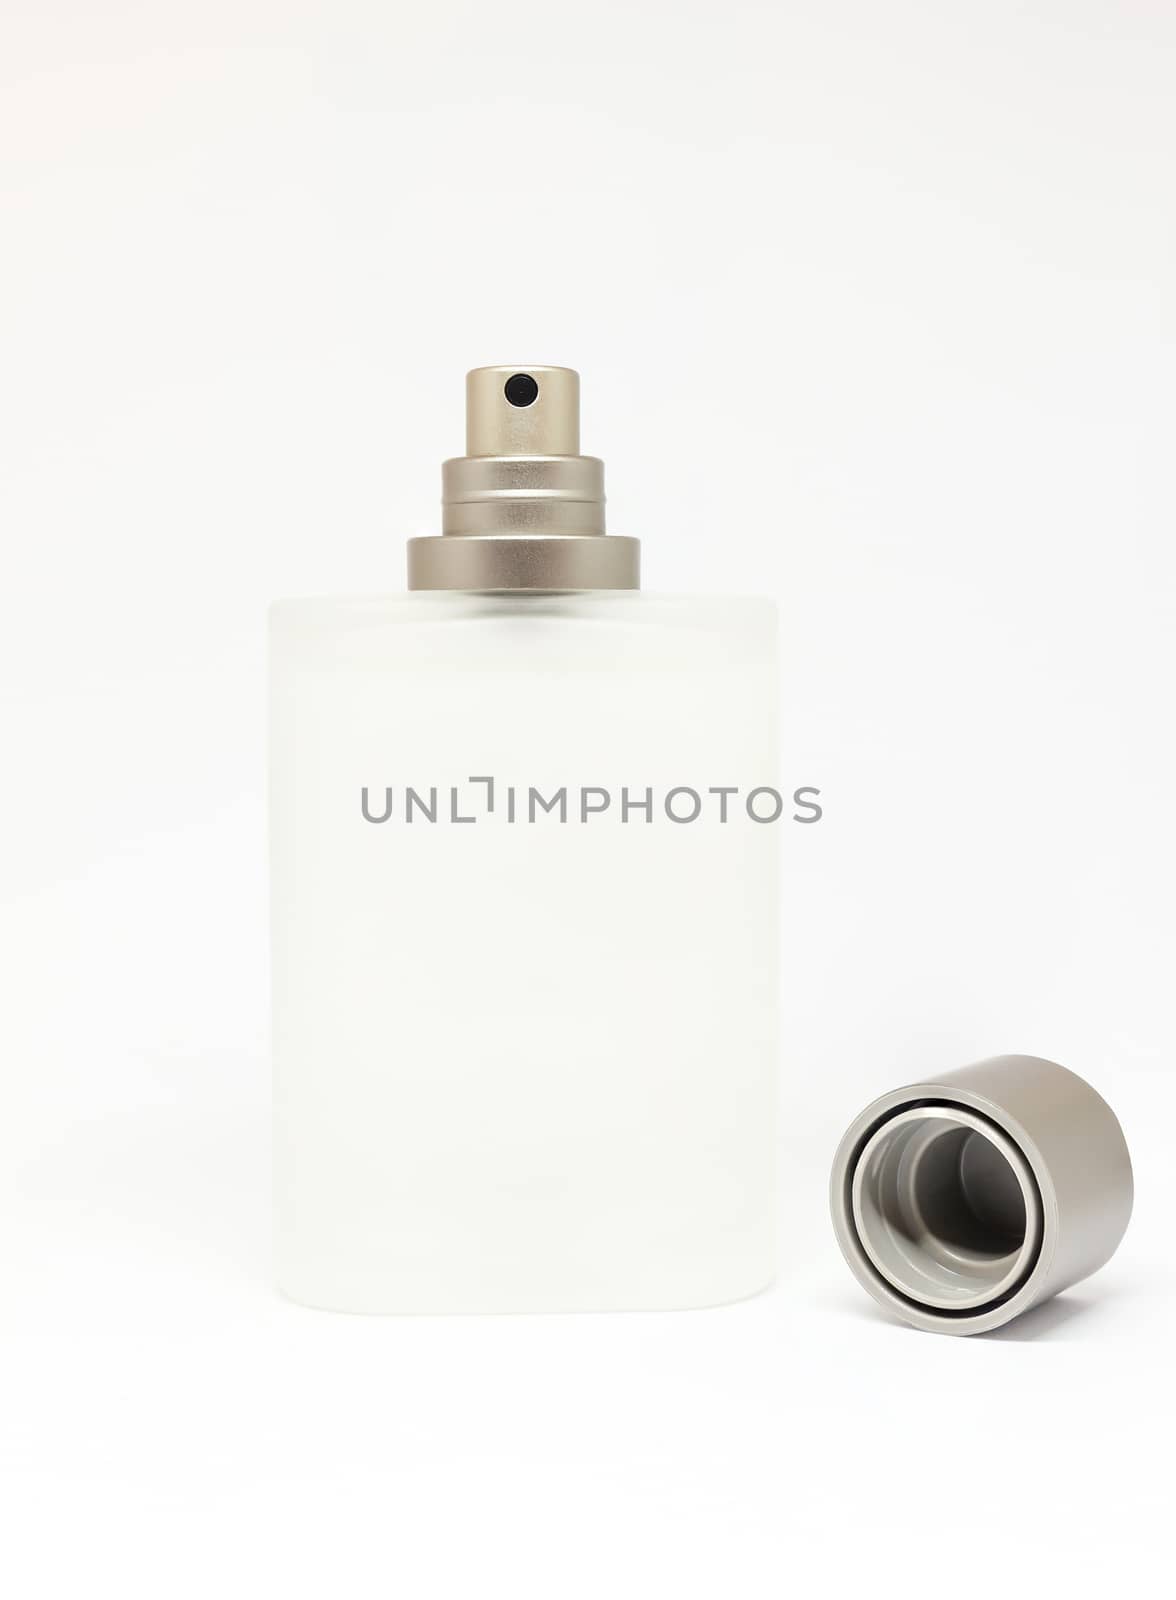 Perfume bottle made from opaque glass with cover beside.